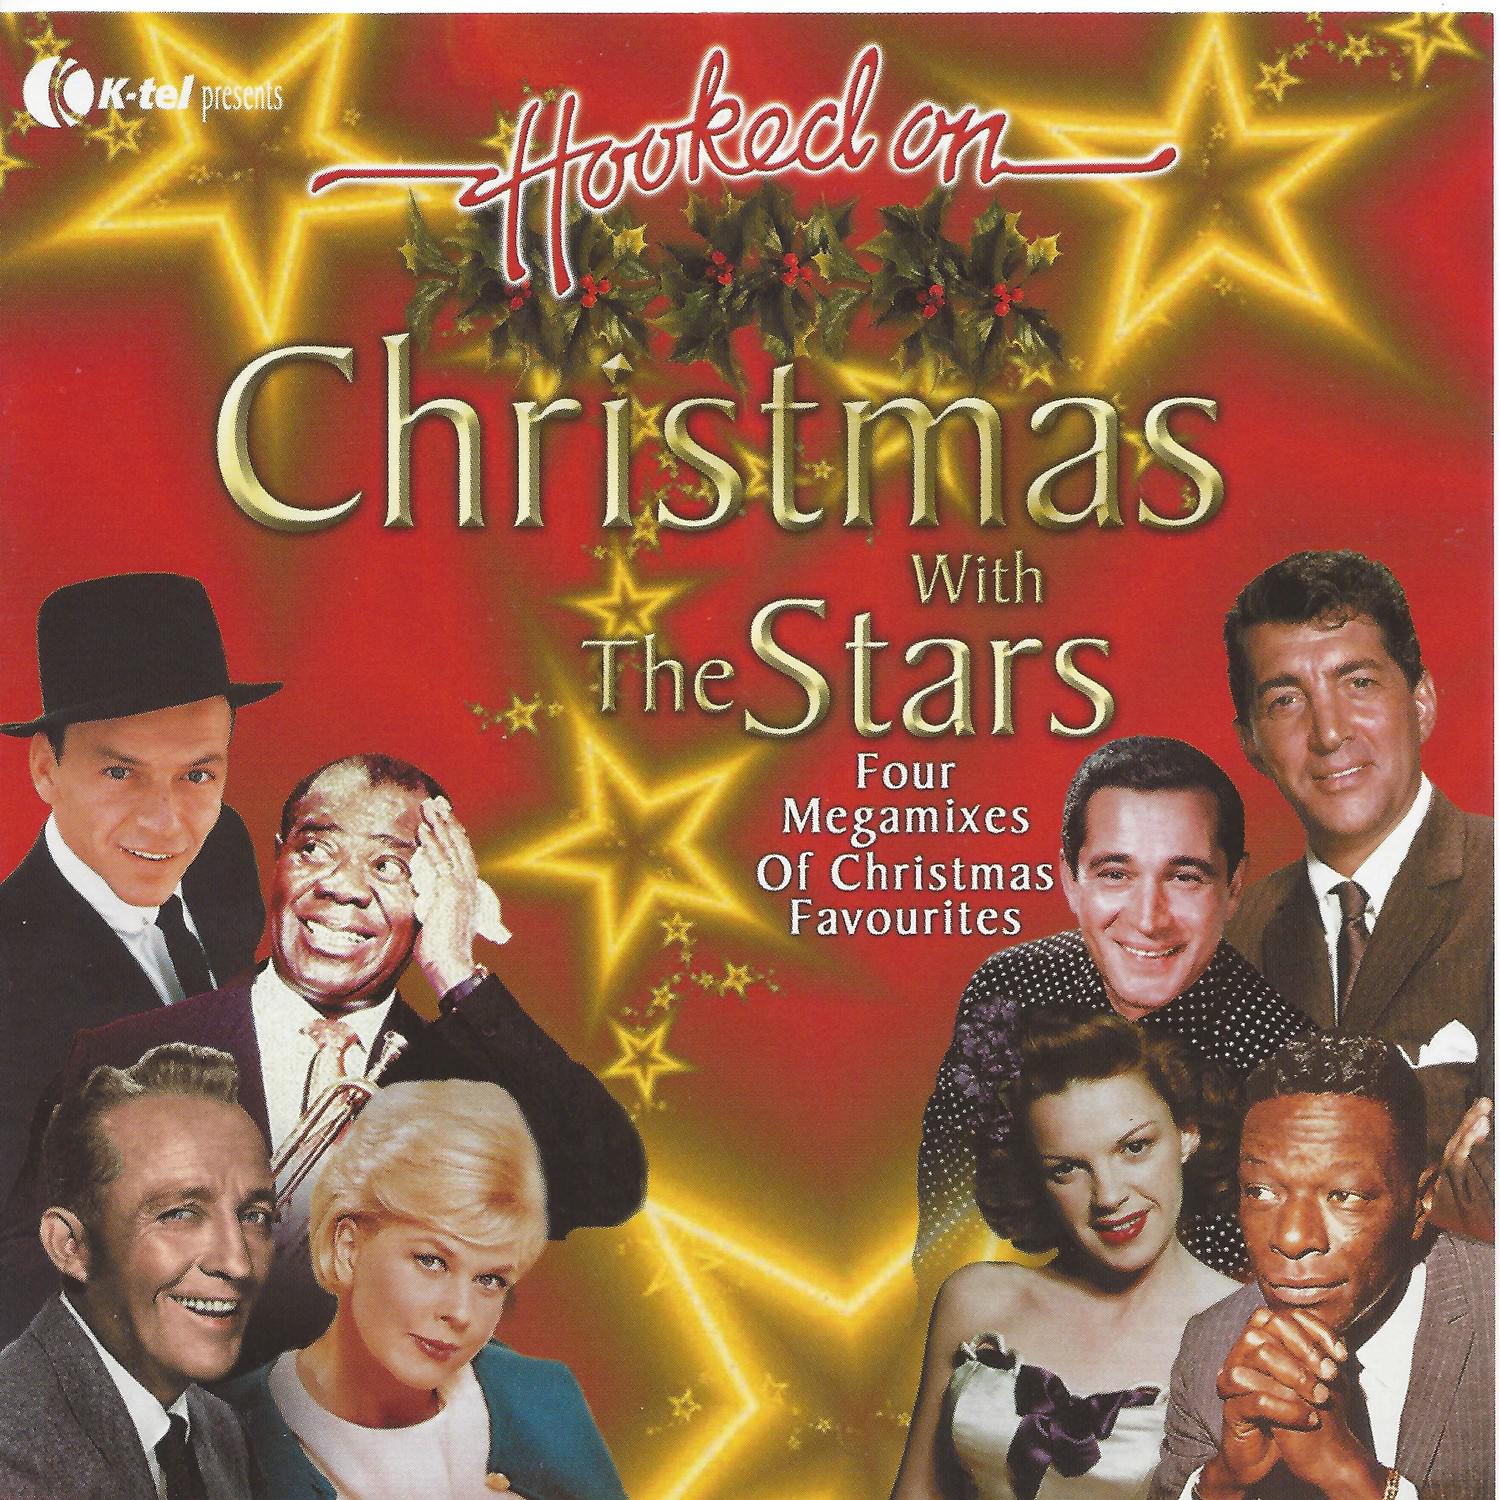 Hooked on Christmas with the Stars